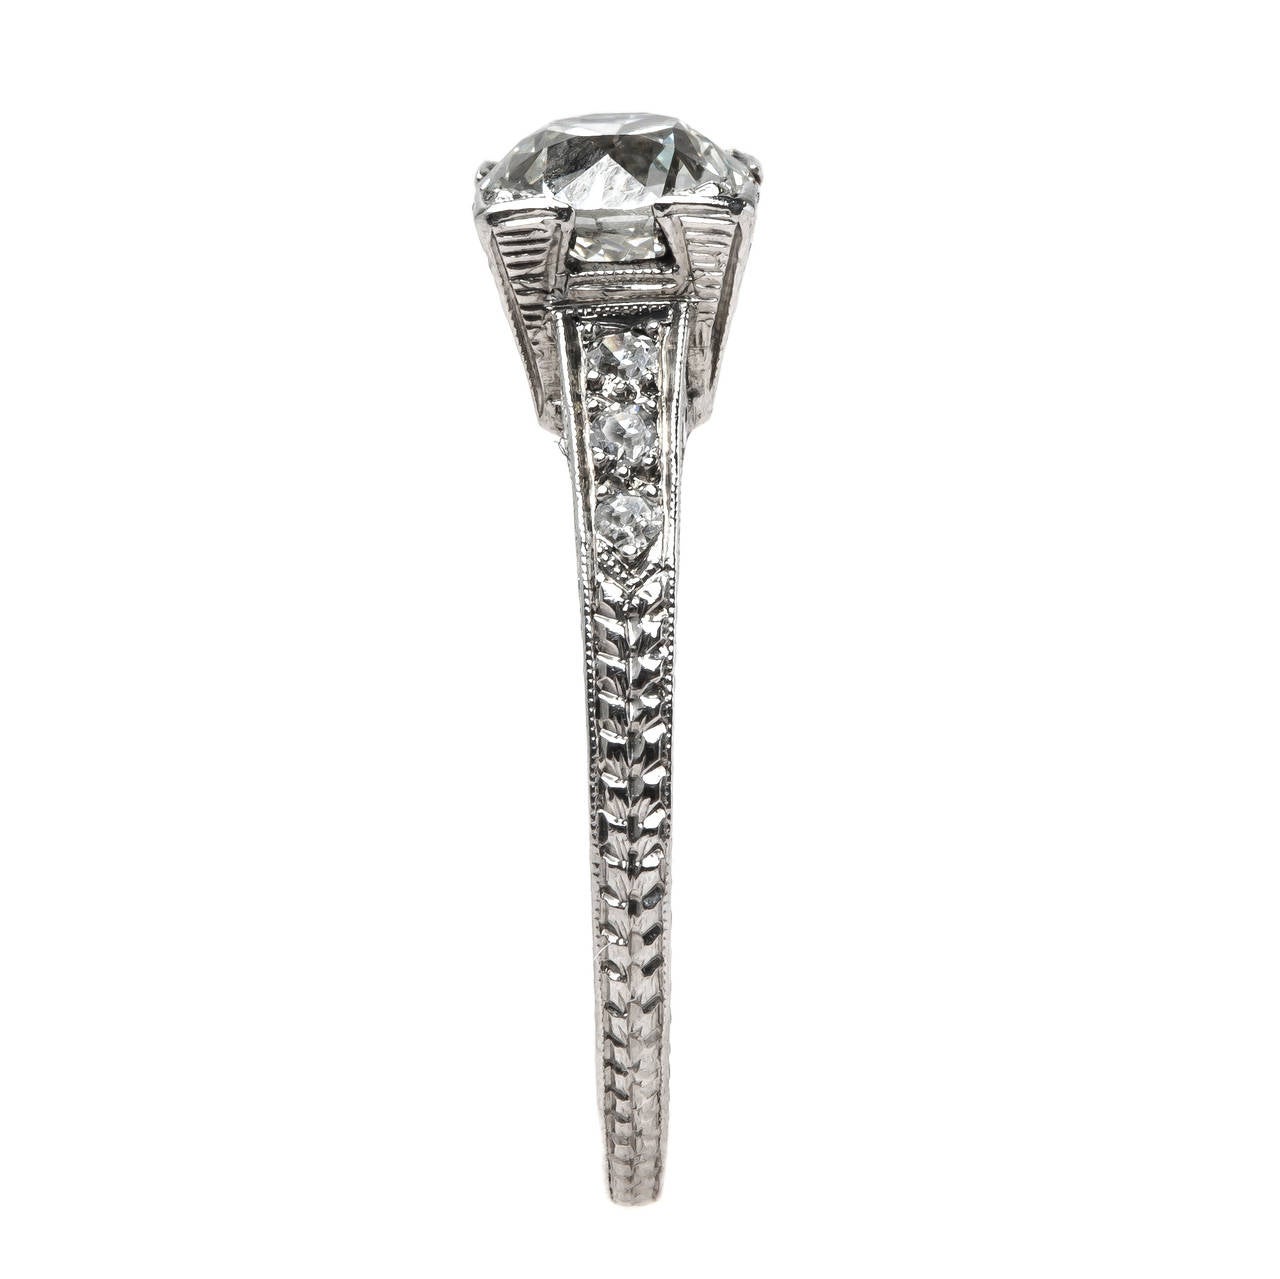 Ridgeback is a timeless authentic Art Deco platinum ring with the year '27 (1927) and initials 